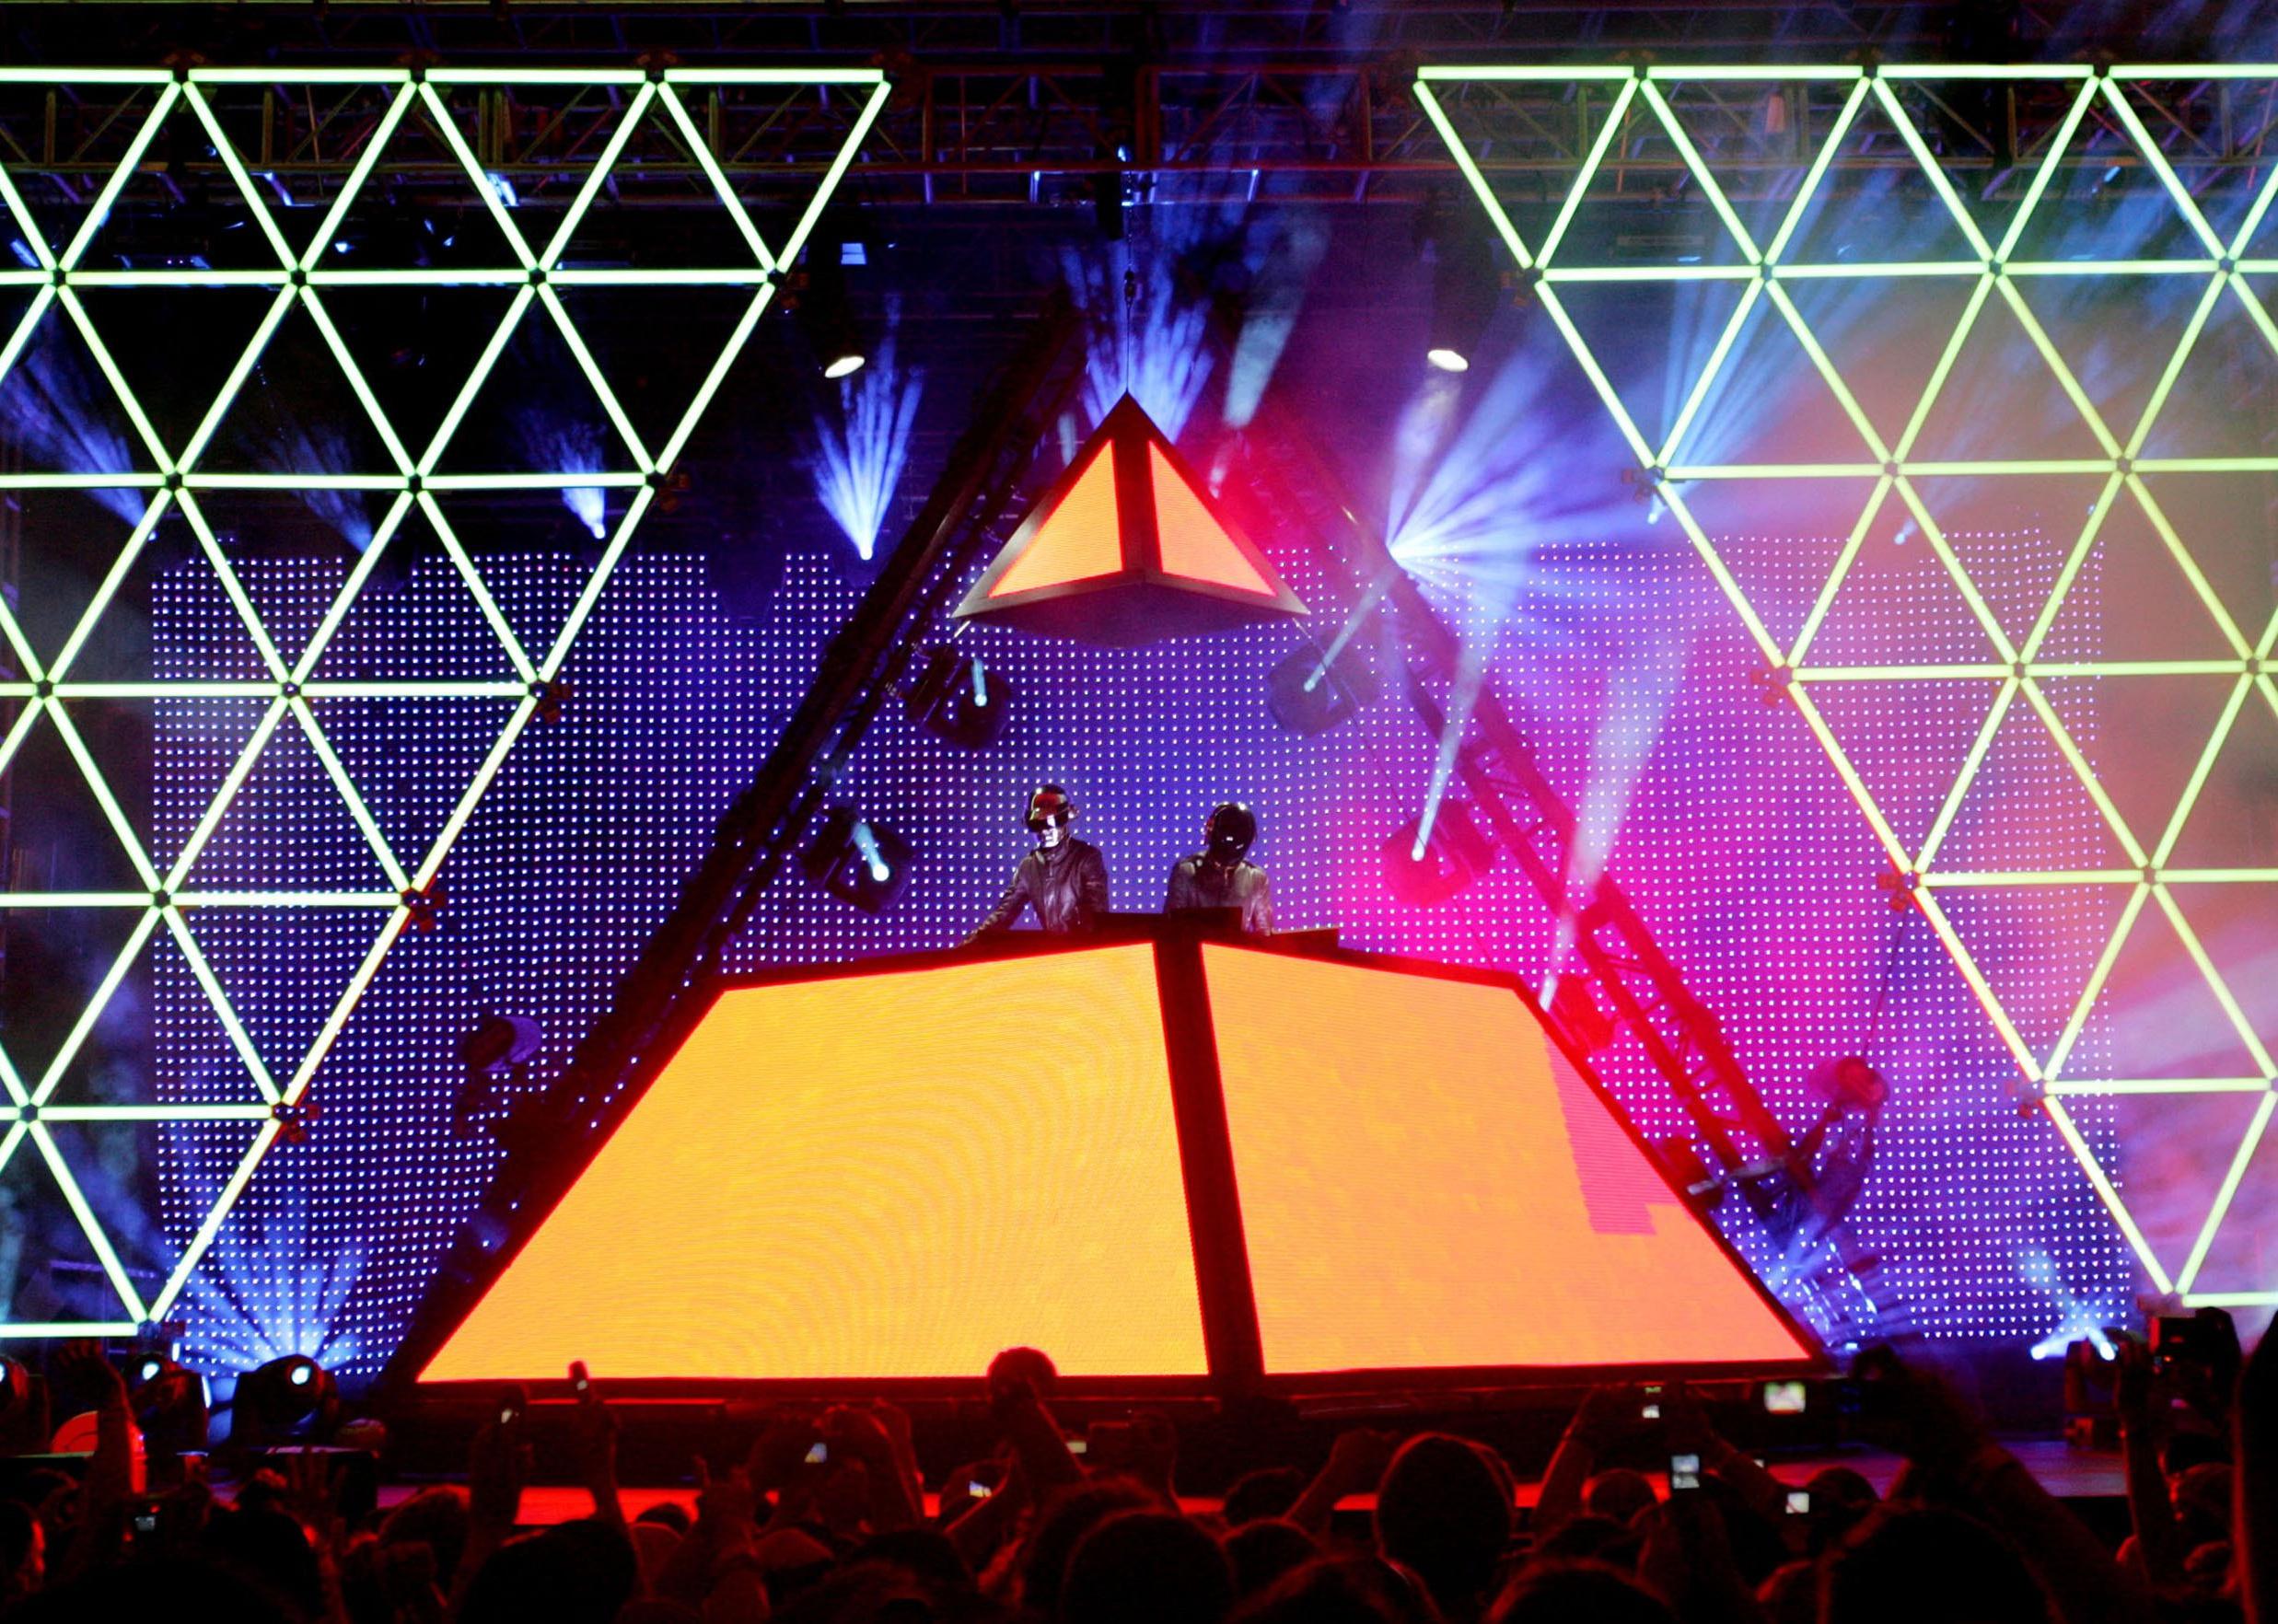 <p>The foremost music festival of the modern era hit a benchmark in 2006 with a comeback performance by French electronic duo Daft Punk. Their legendary set atop a pyramid-style stage "irrevocably changed the course of music," <a href="https://faroutmagazine.co.uk/the-daft-punk-coachella-comeback-set-that-changed-the-course-of-music/">Far Out magazine once wrote</a>. Depeche Mode and Tool were the co-headliners that year.</p>